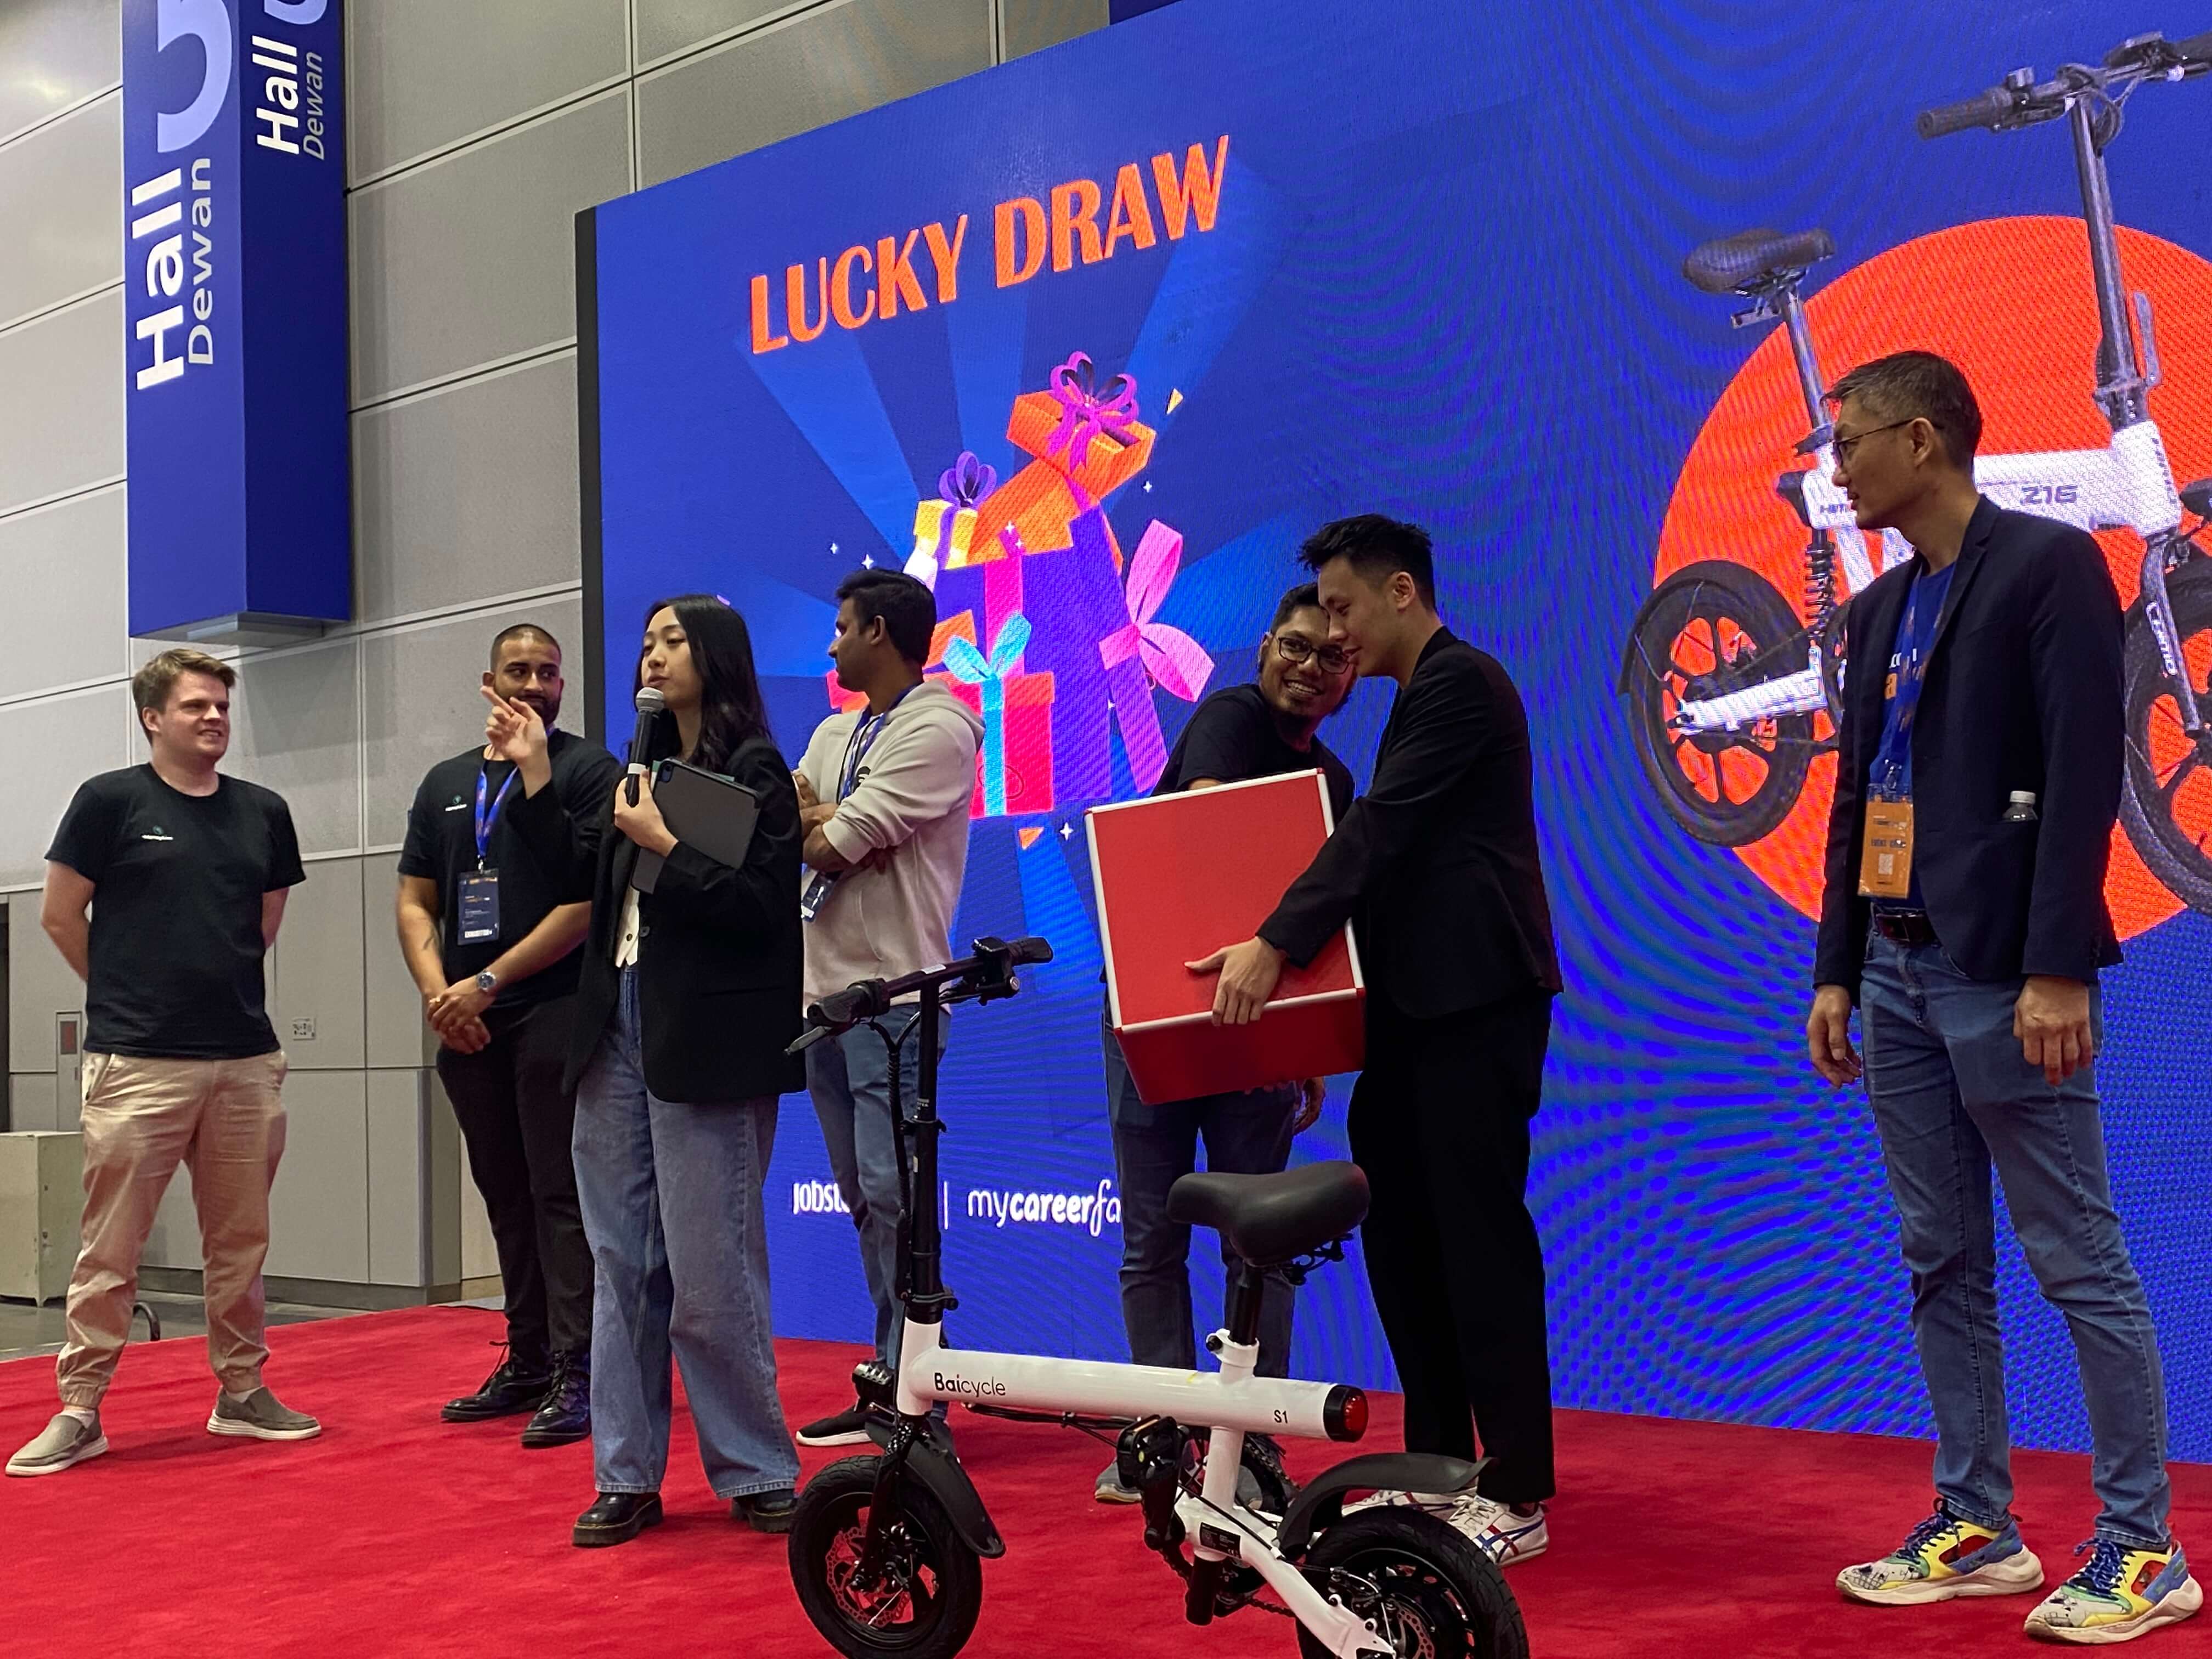 Lucky Draw event @ Jobstore Mycareerfair on 23 & 24 March 2023 @ Kuala Lumpur Convention Centre